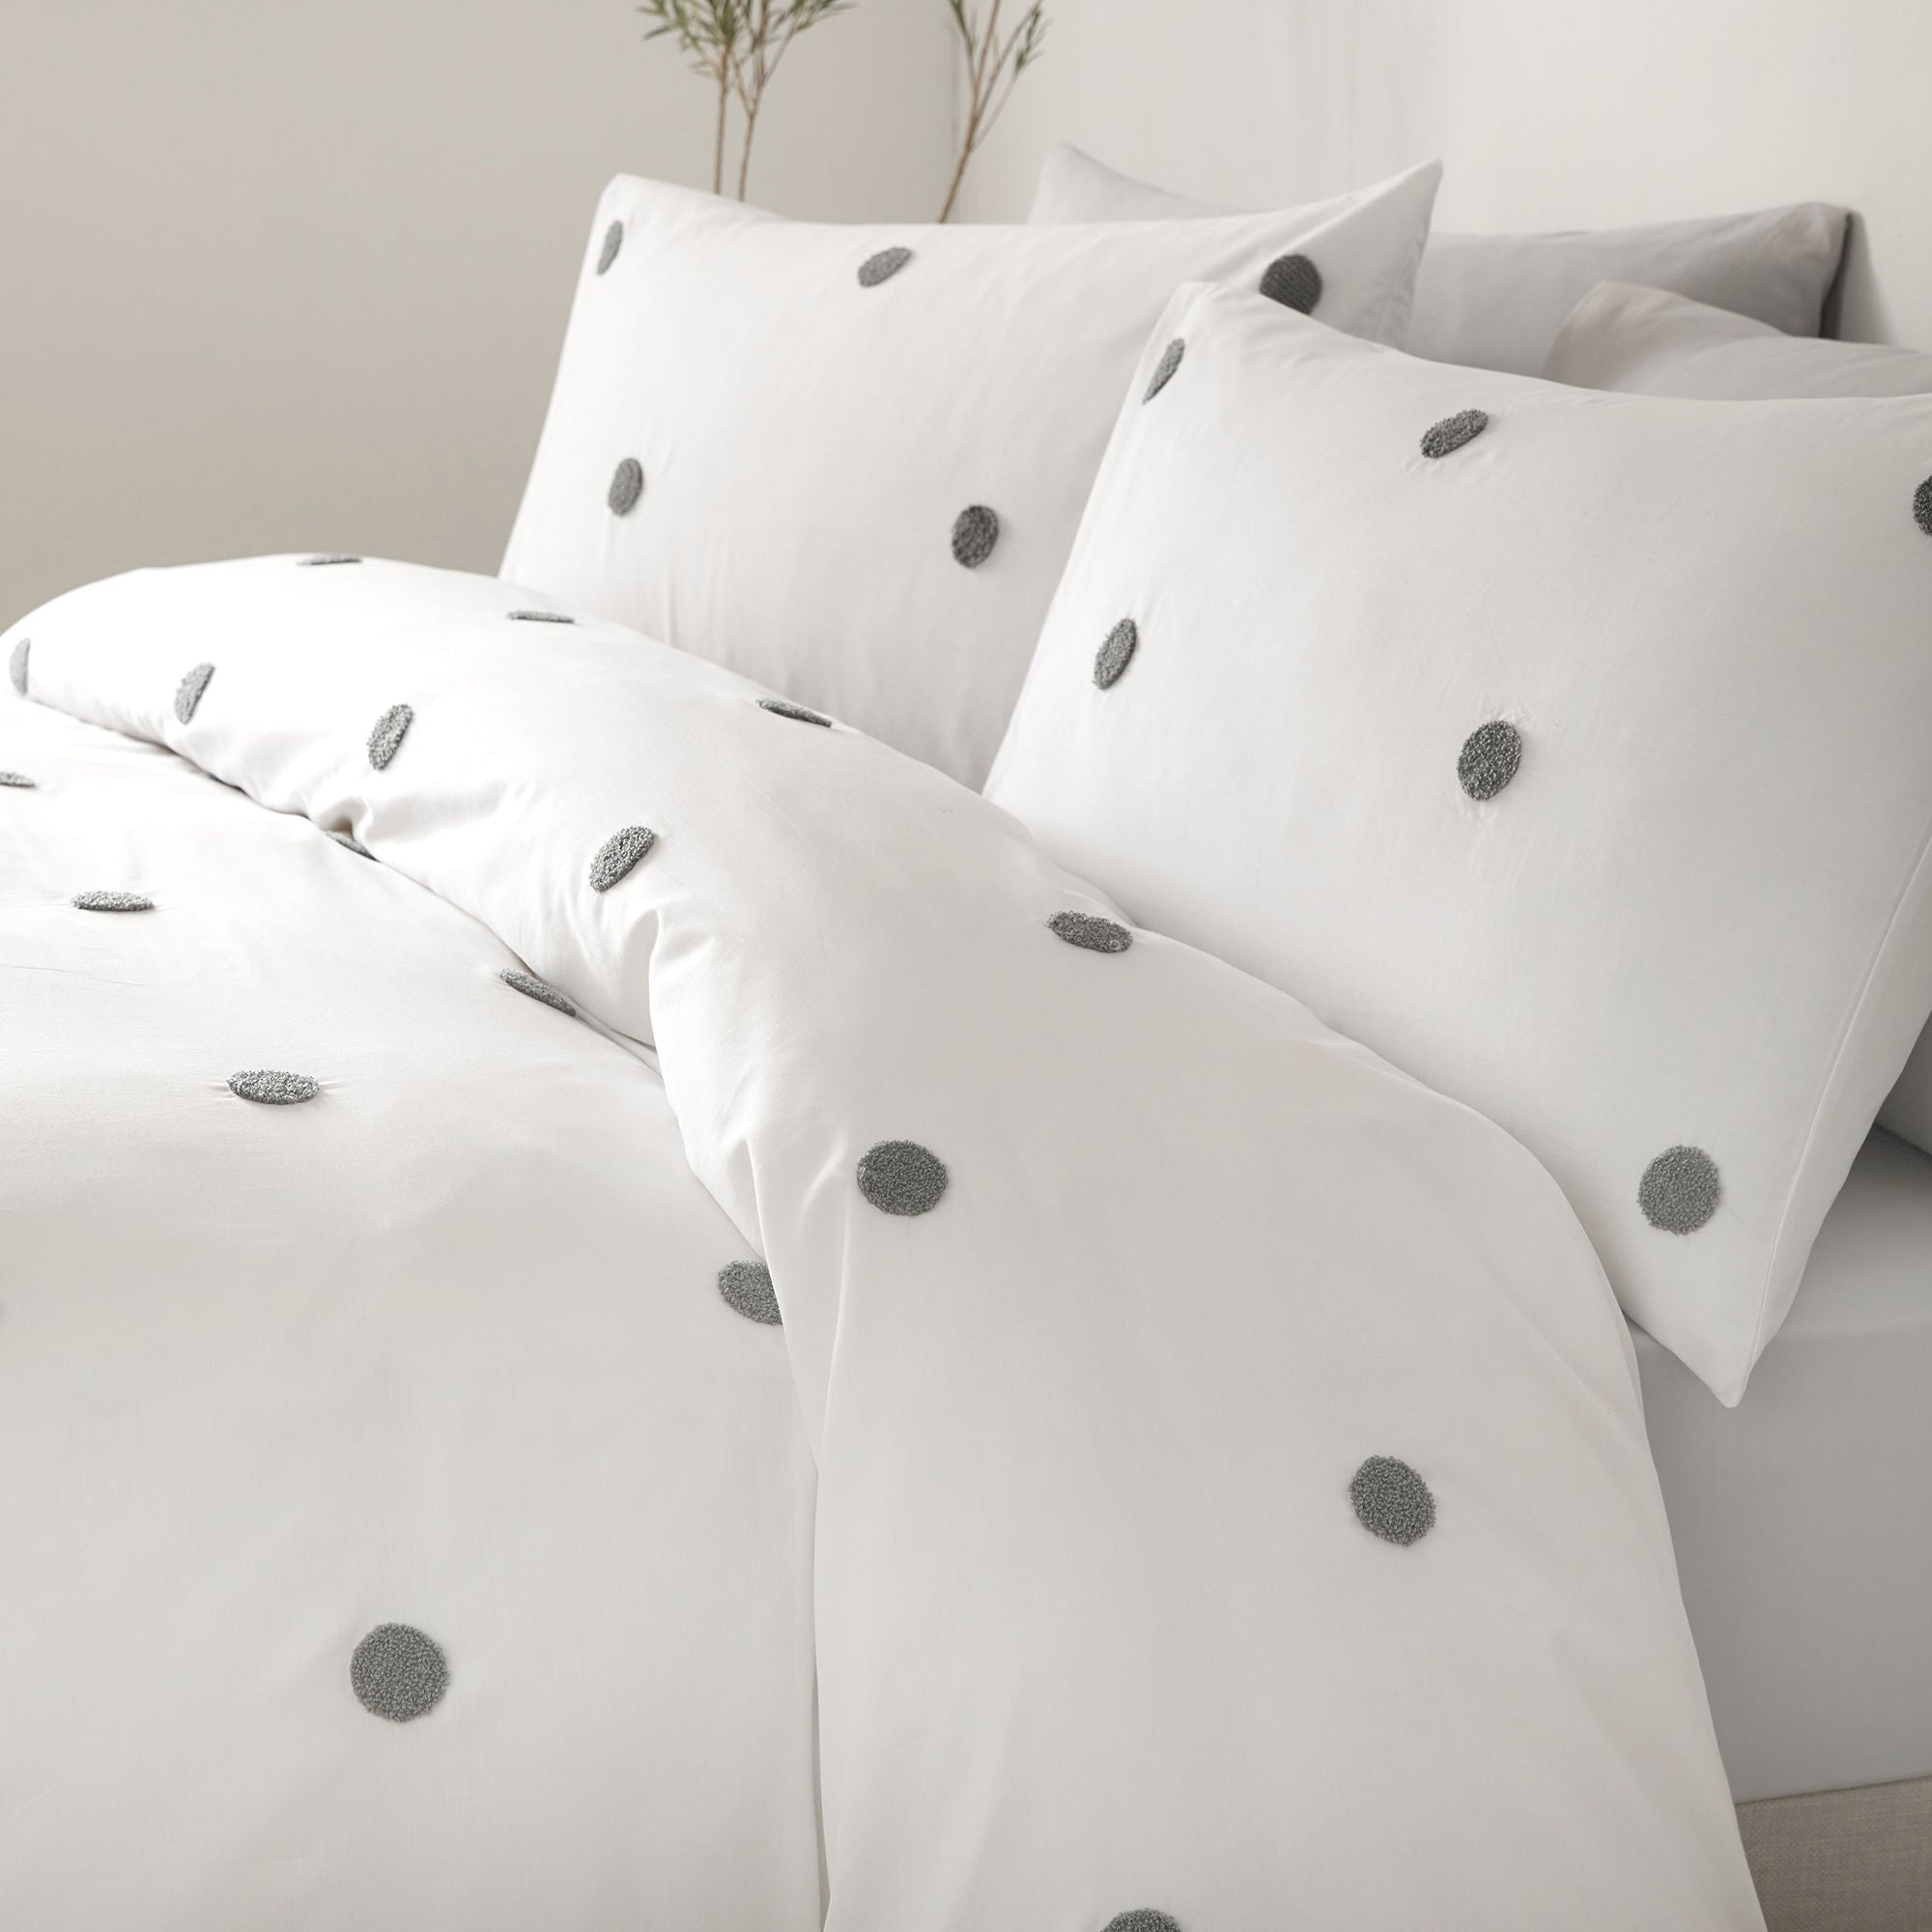 Dot Garden Duvet Cover Set by Appletree Boutique in White with Slate Dots - Duvet Cover Set - Appletree Boutique